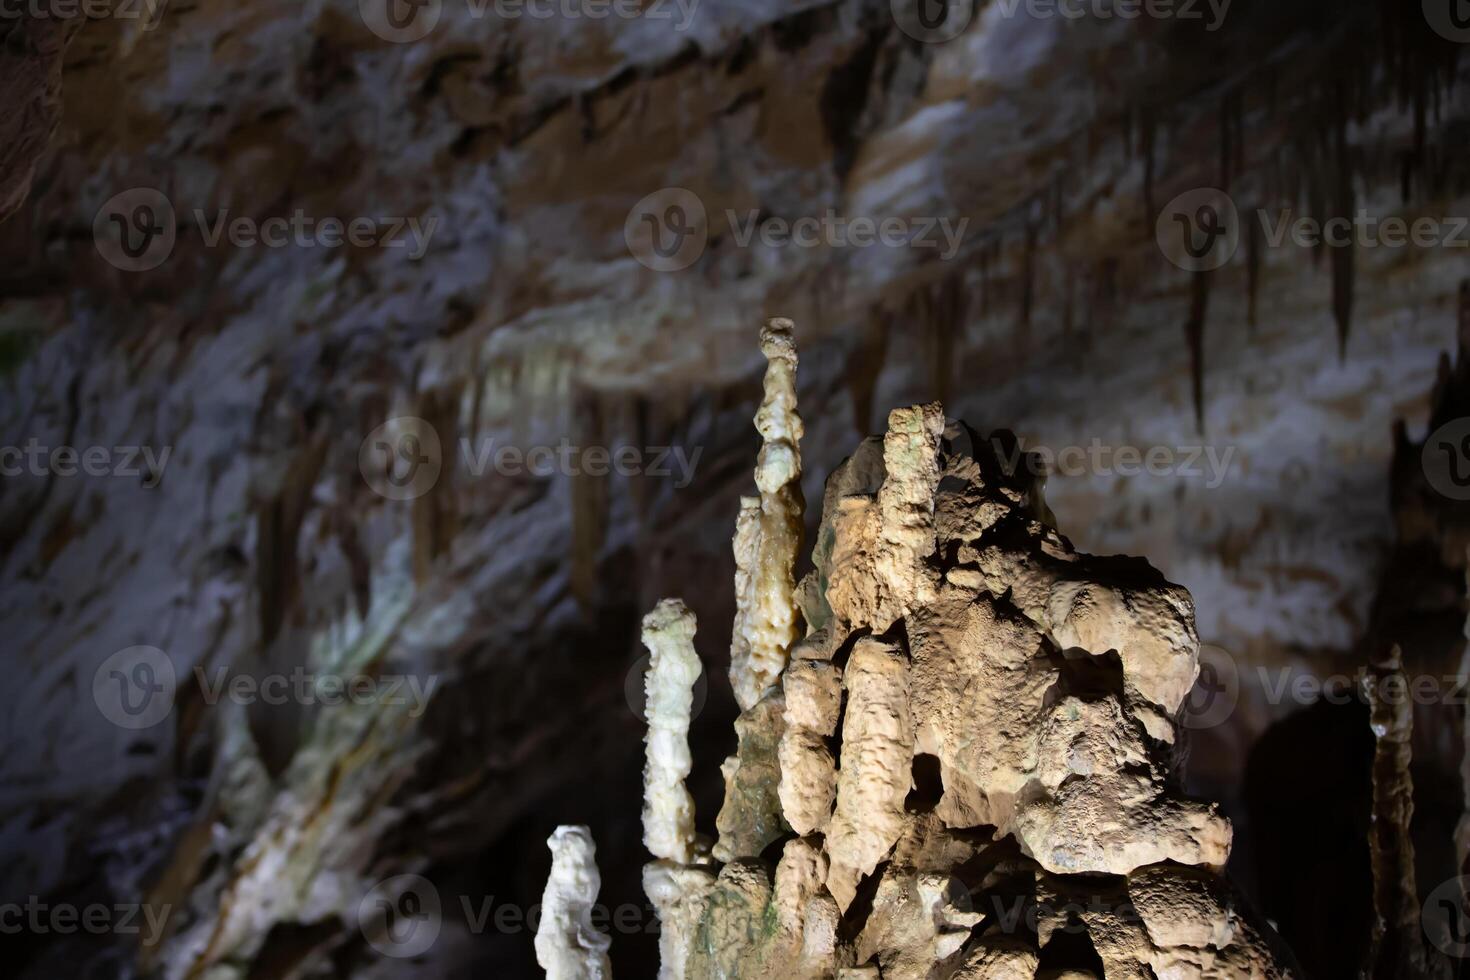 The cave is karst, amazing view of stalactites and stalagnites illuminated by bright light, a beautiful natural attraction in a tourist place. photo